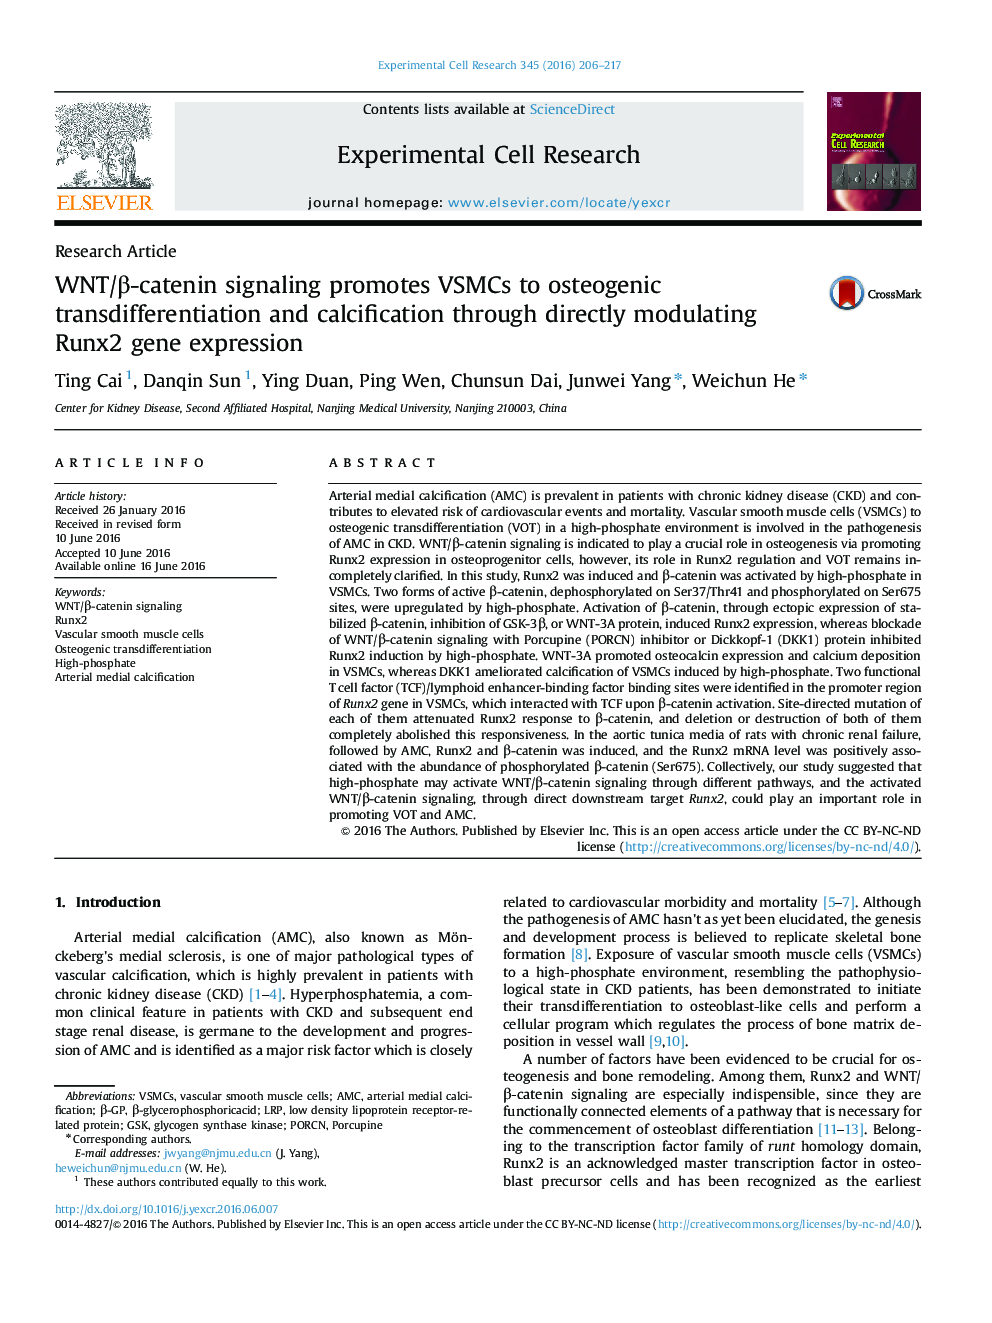 WNT/Î²-catenin signaling promotes VSMCs to osteogenic transdifferentiation and calcification through directly modulating Runx2 gene expression